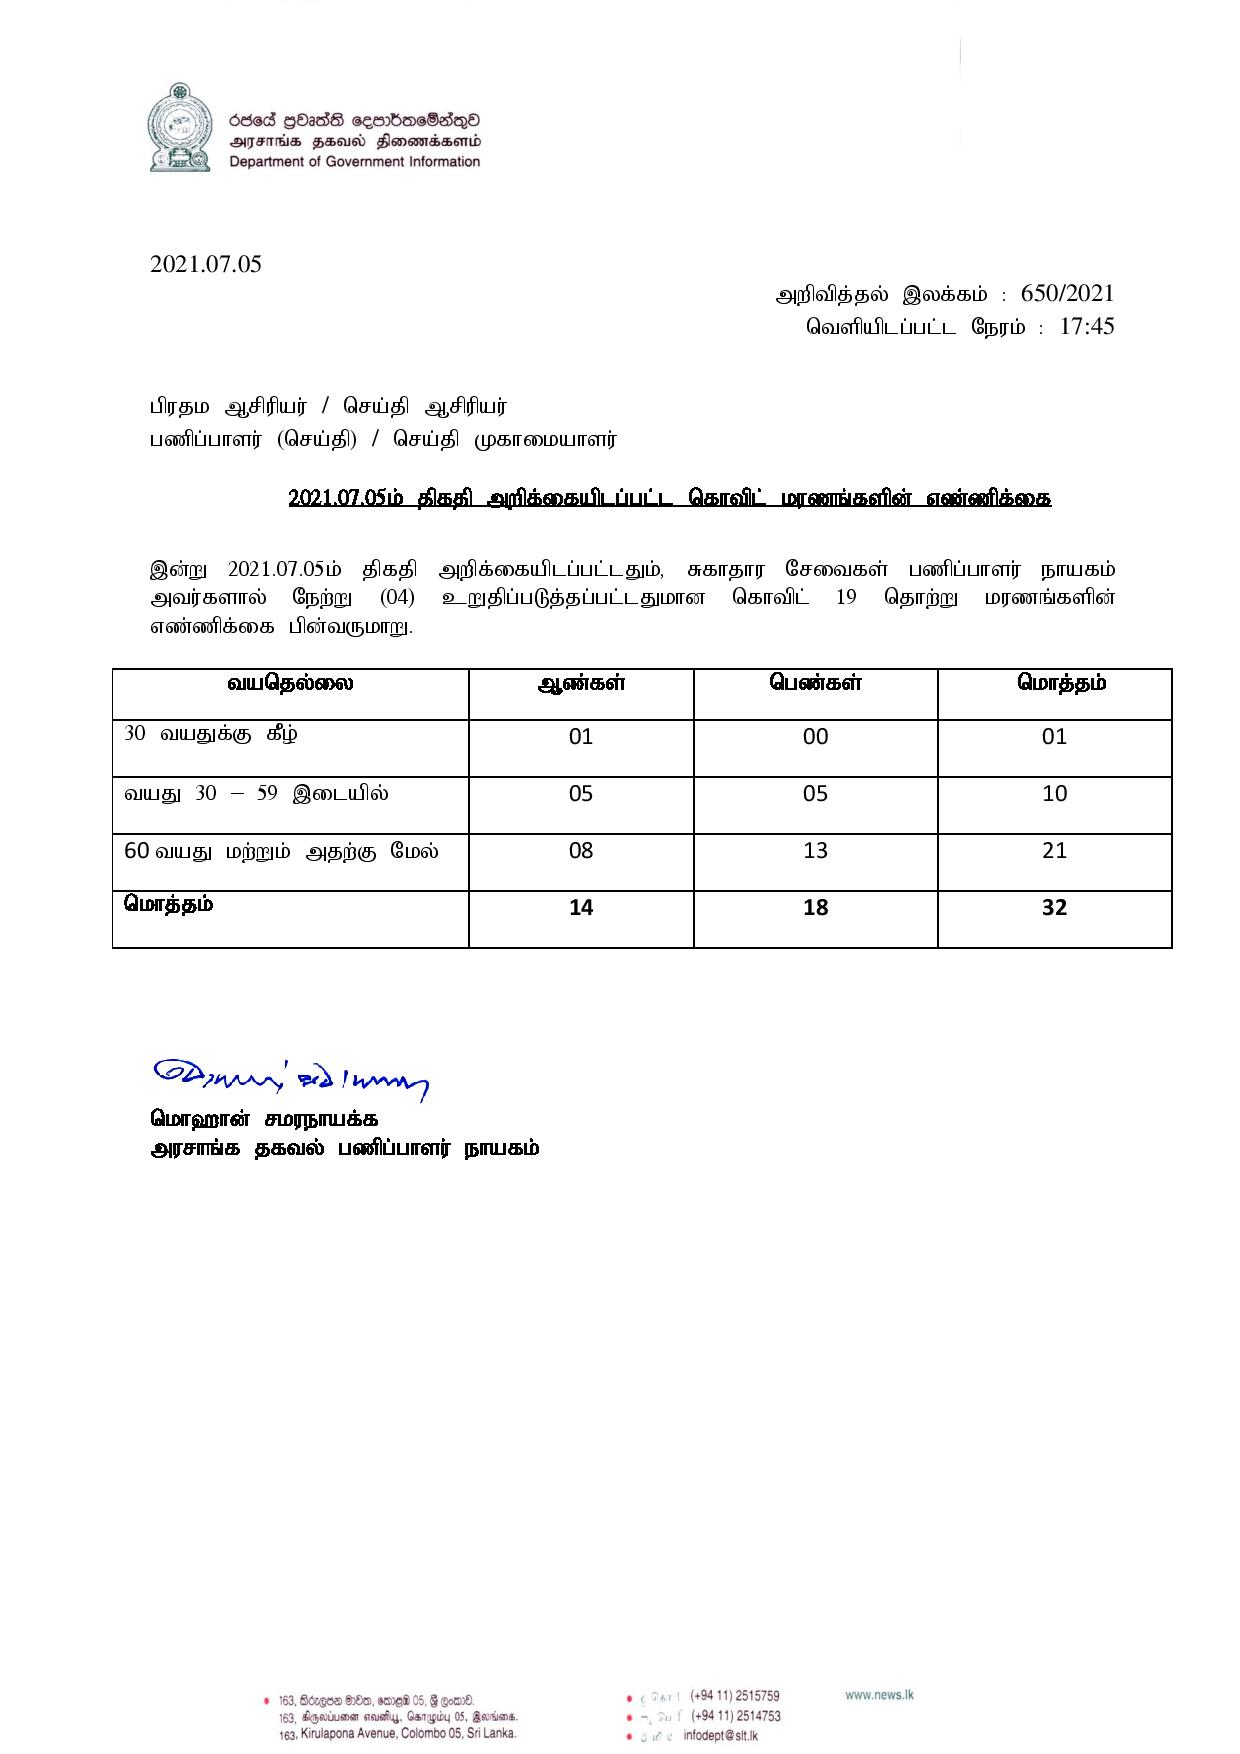 Press Release 650 Tamil page 001